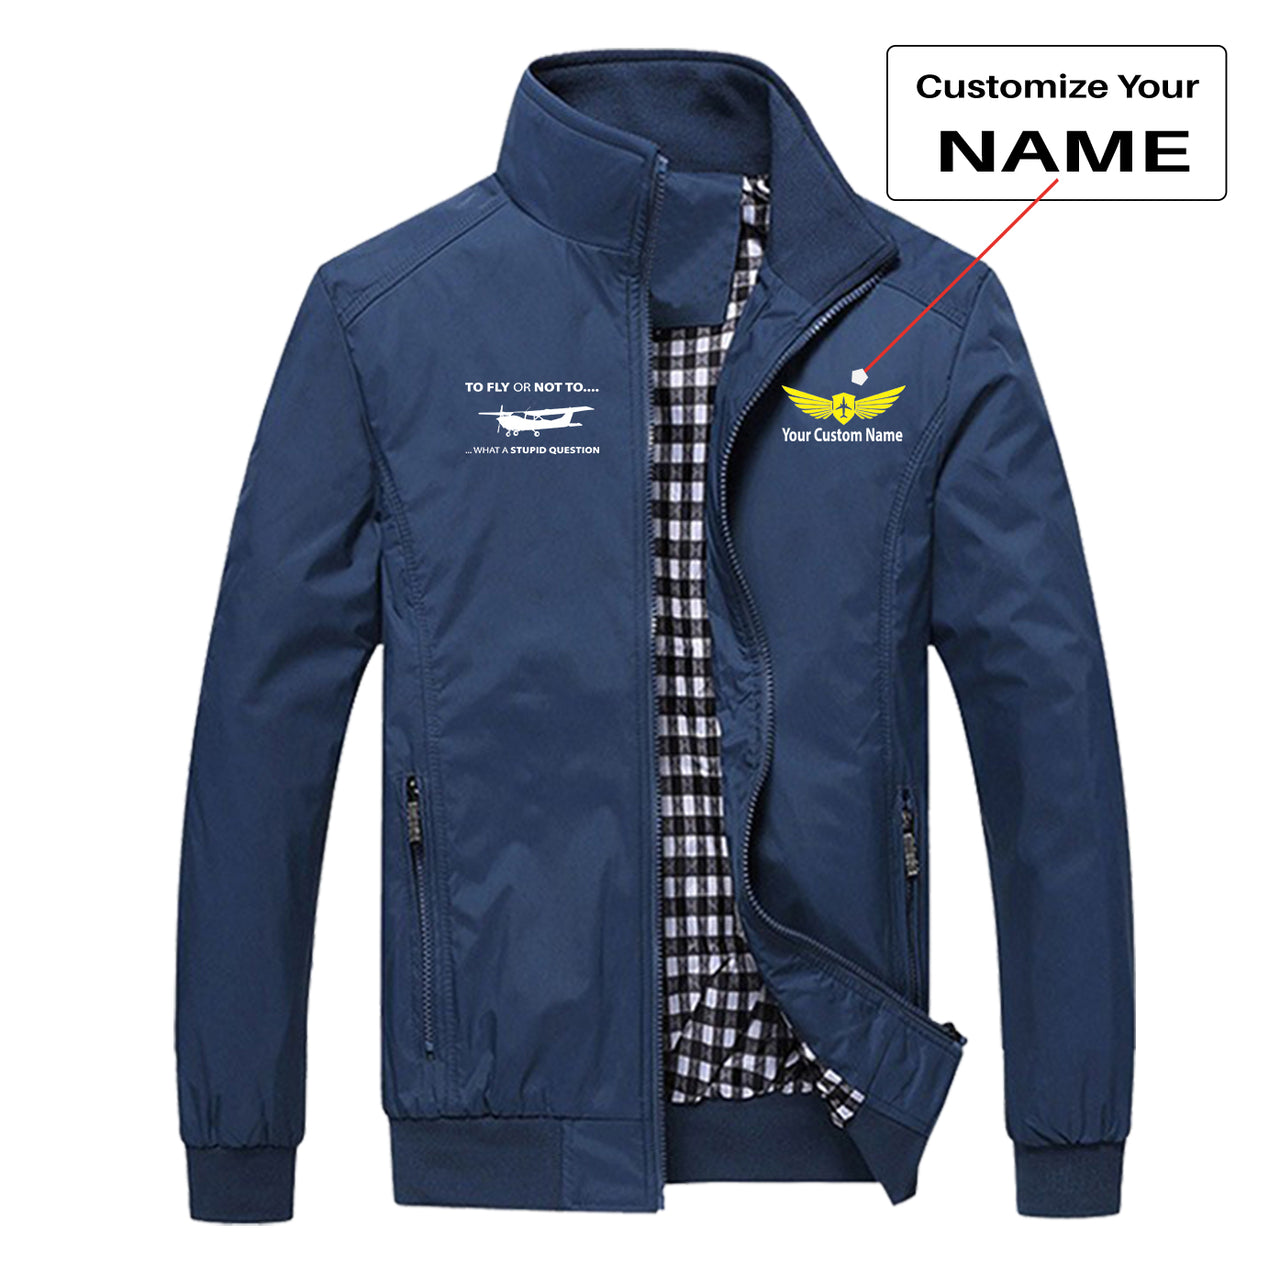 To Fly or Not To What a Stupid Question Designed Stylish Jackets